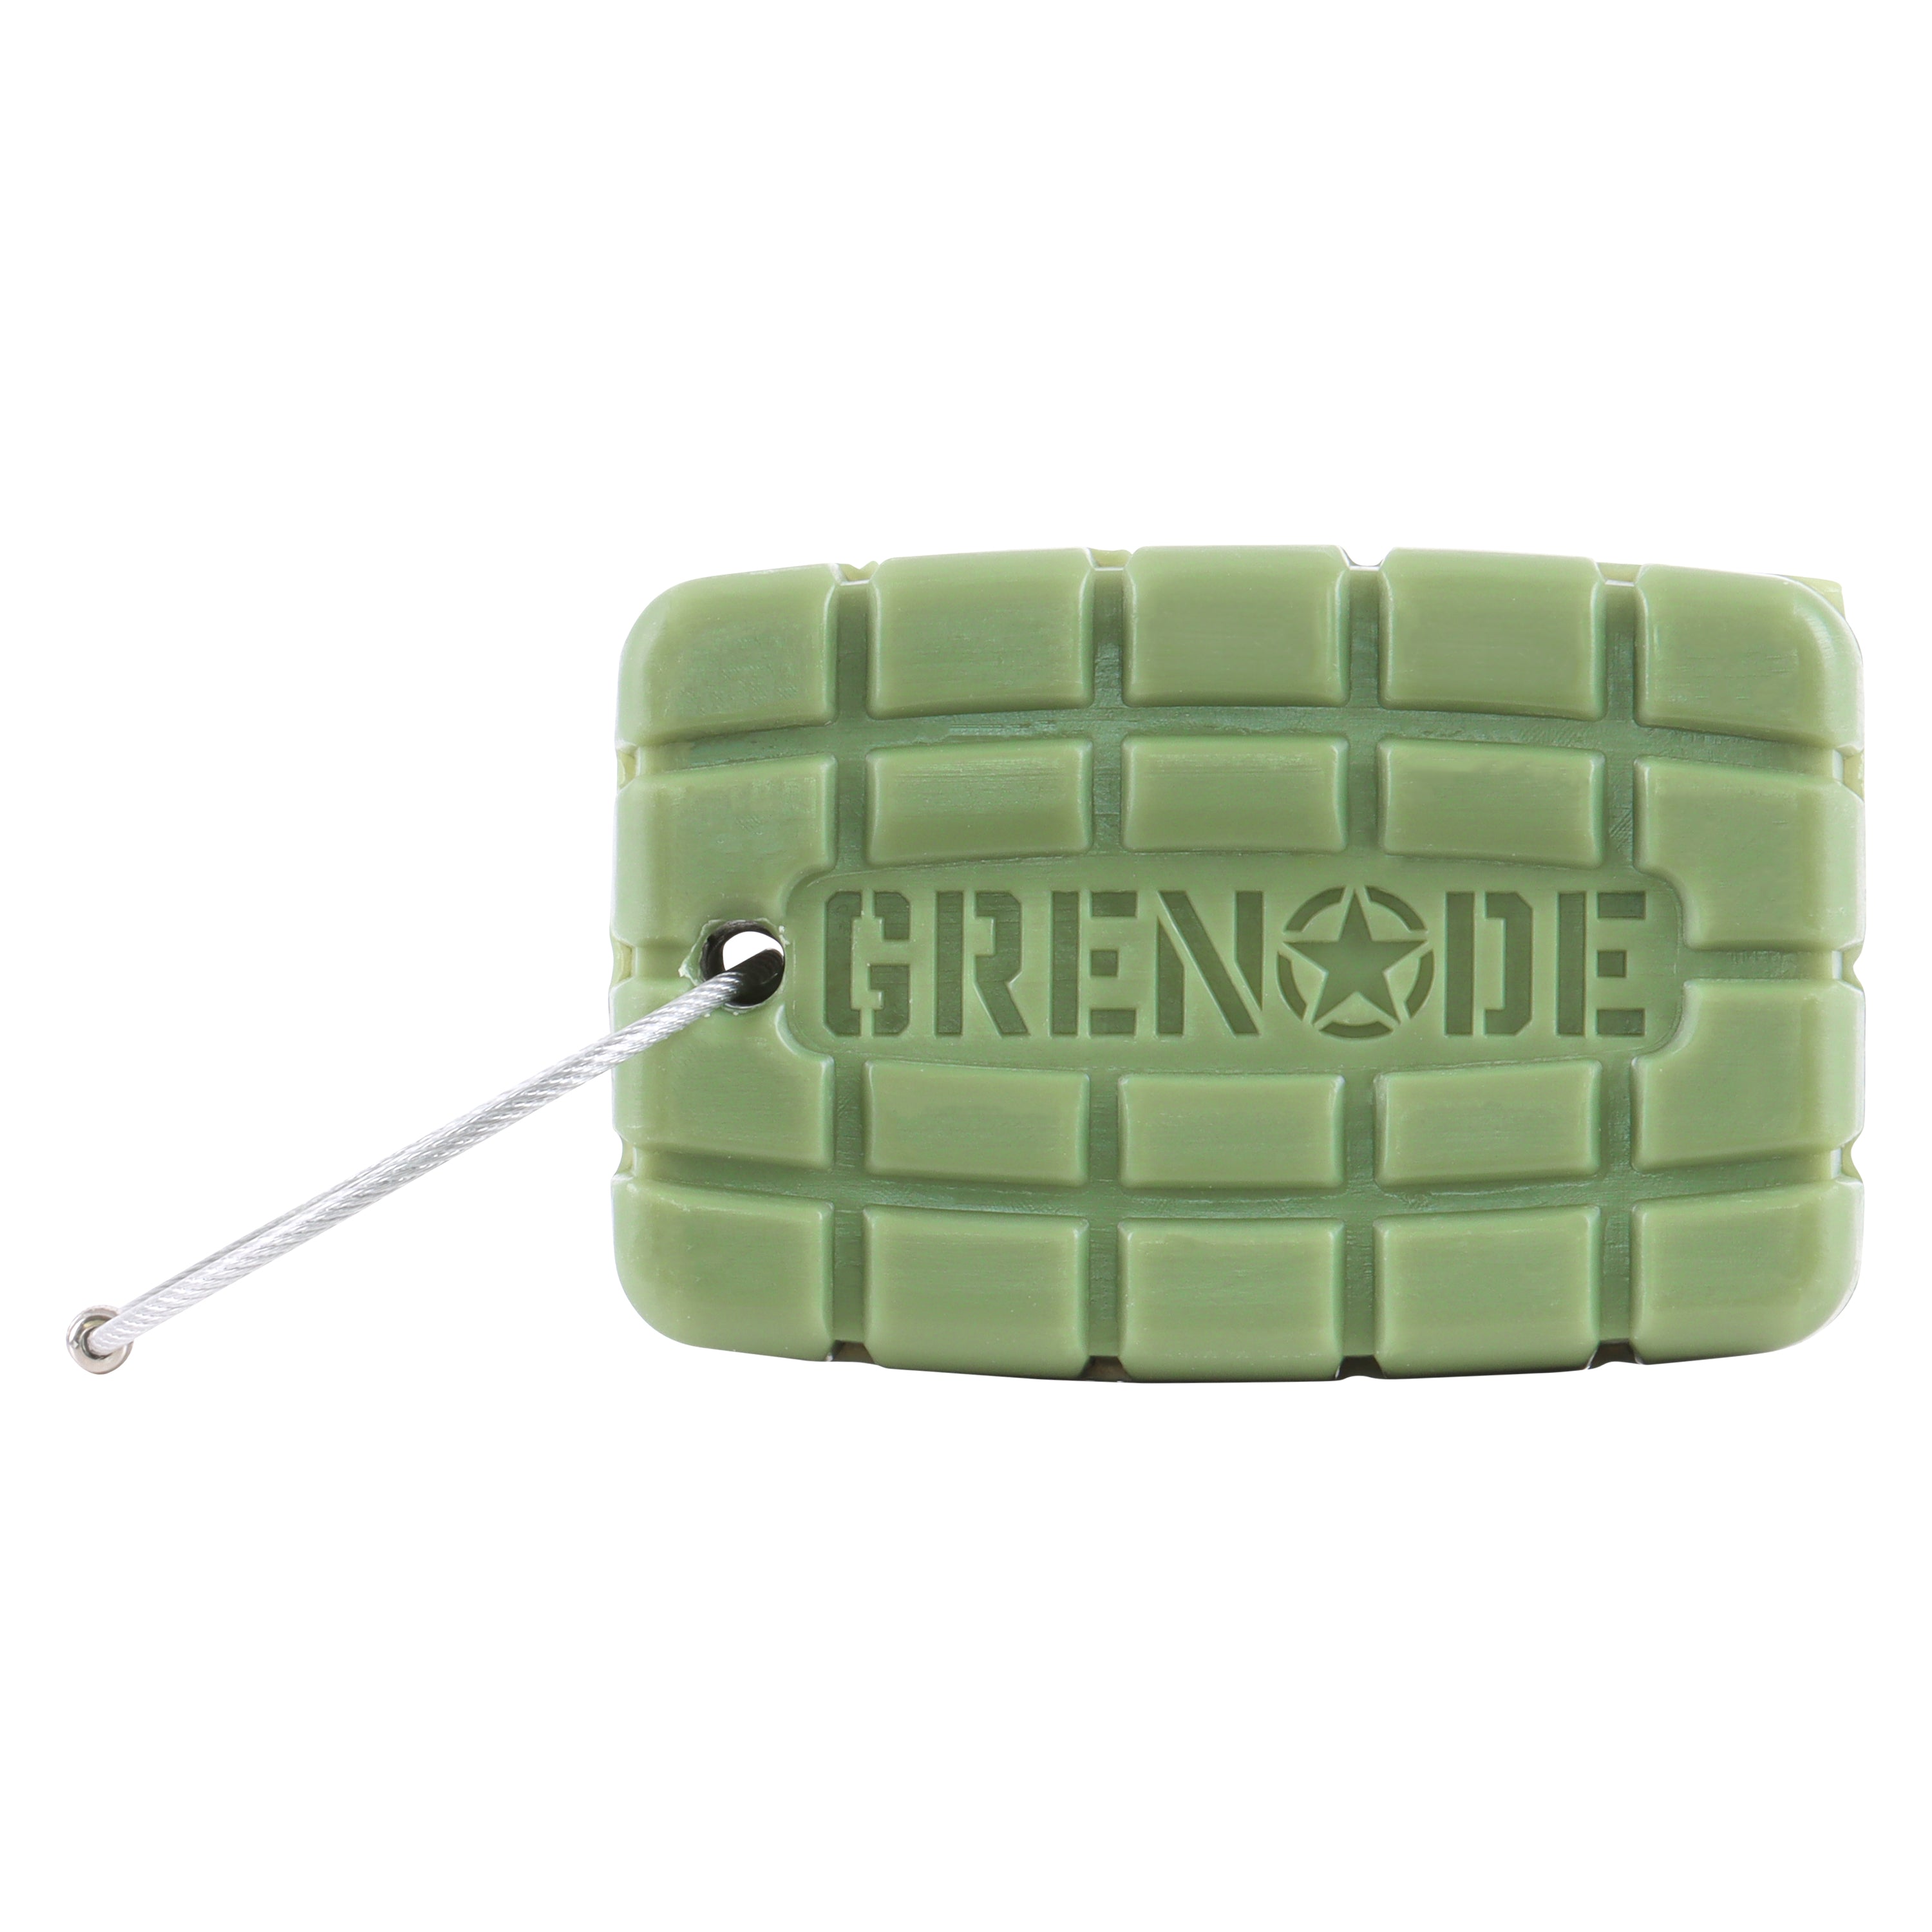 GRENADE® SOAP CO X ONE MAN ARMY - NAPALM®